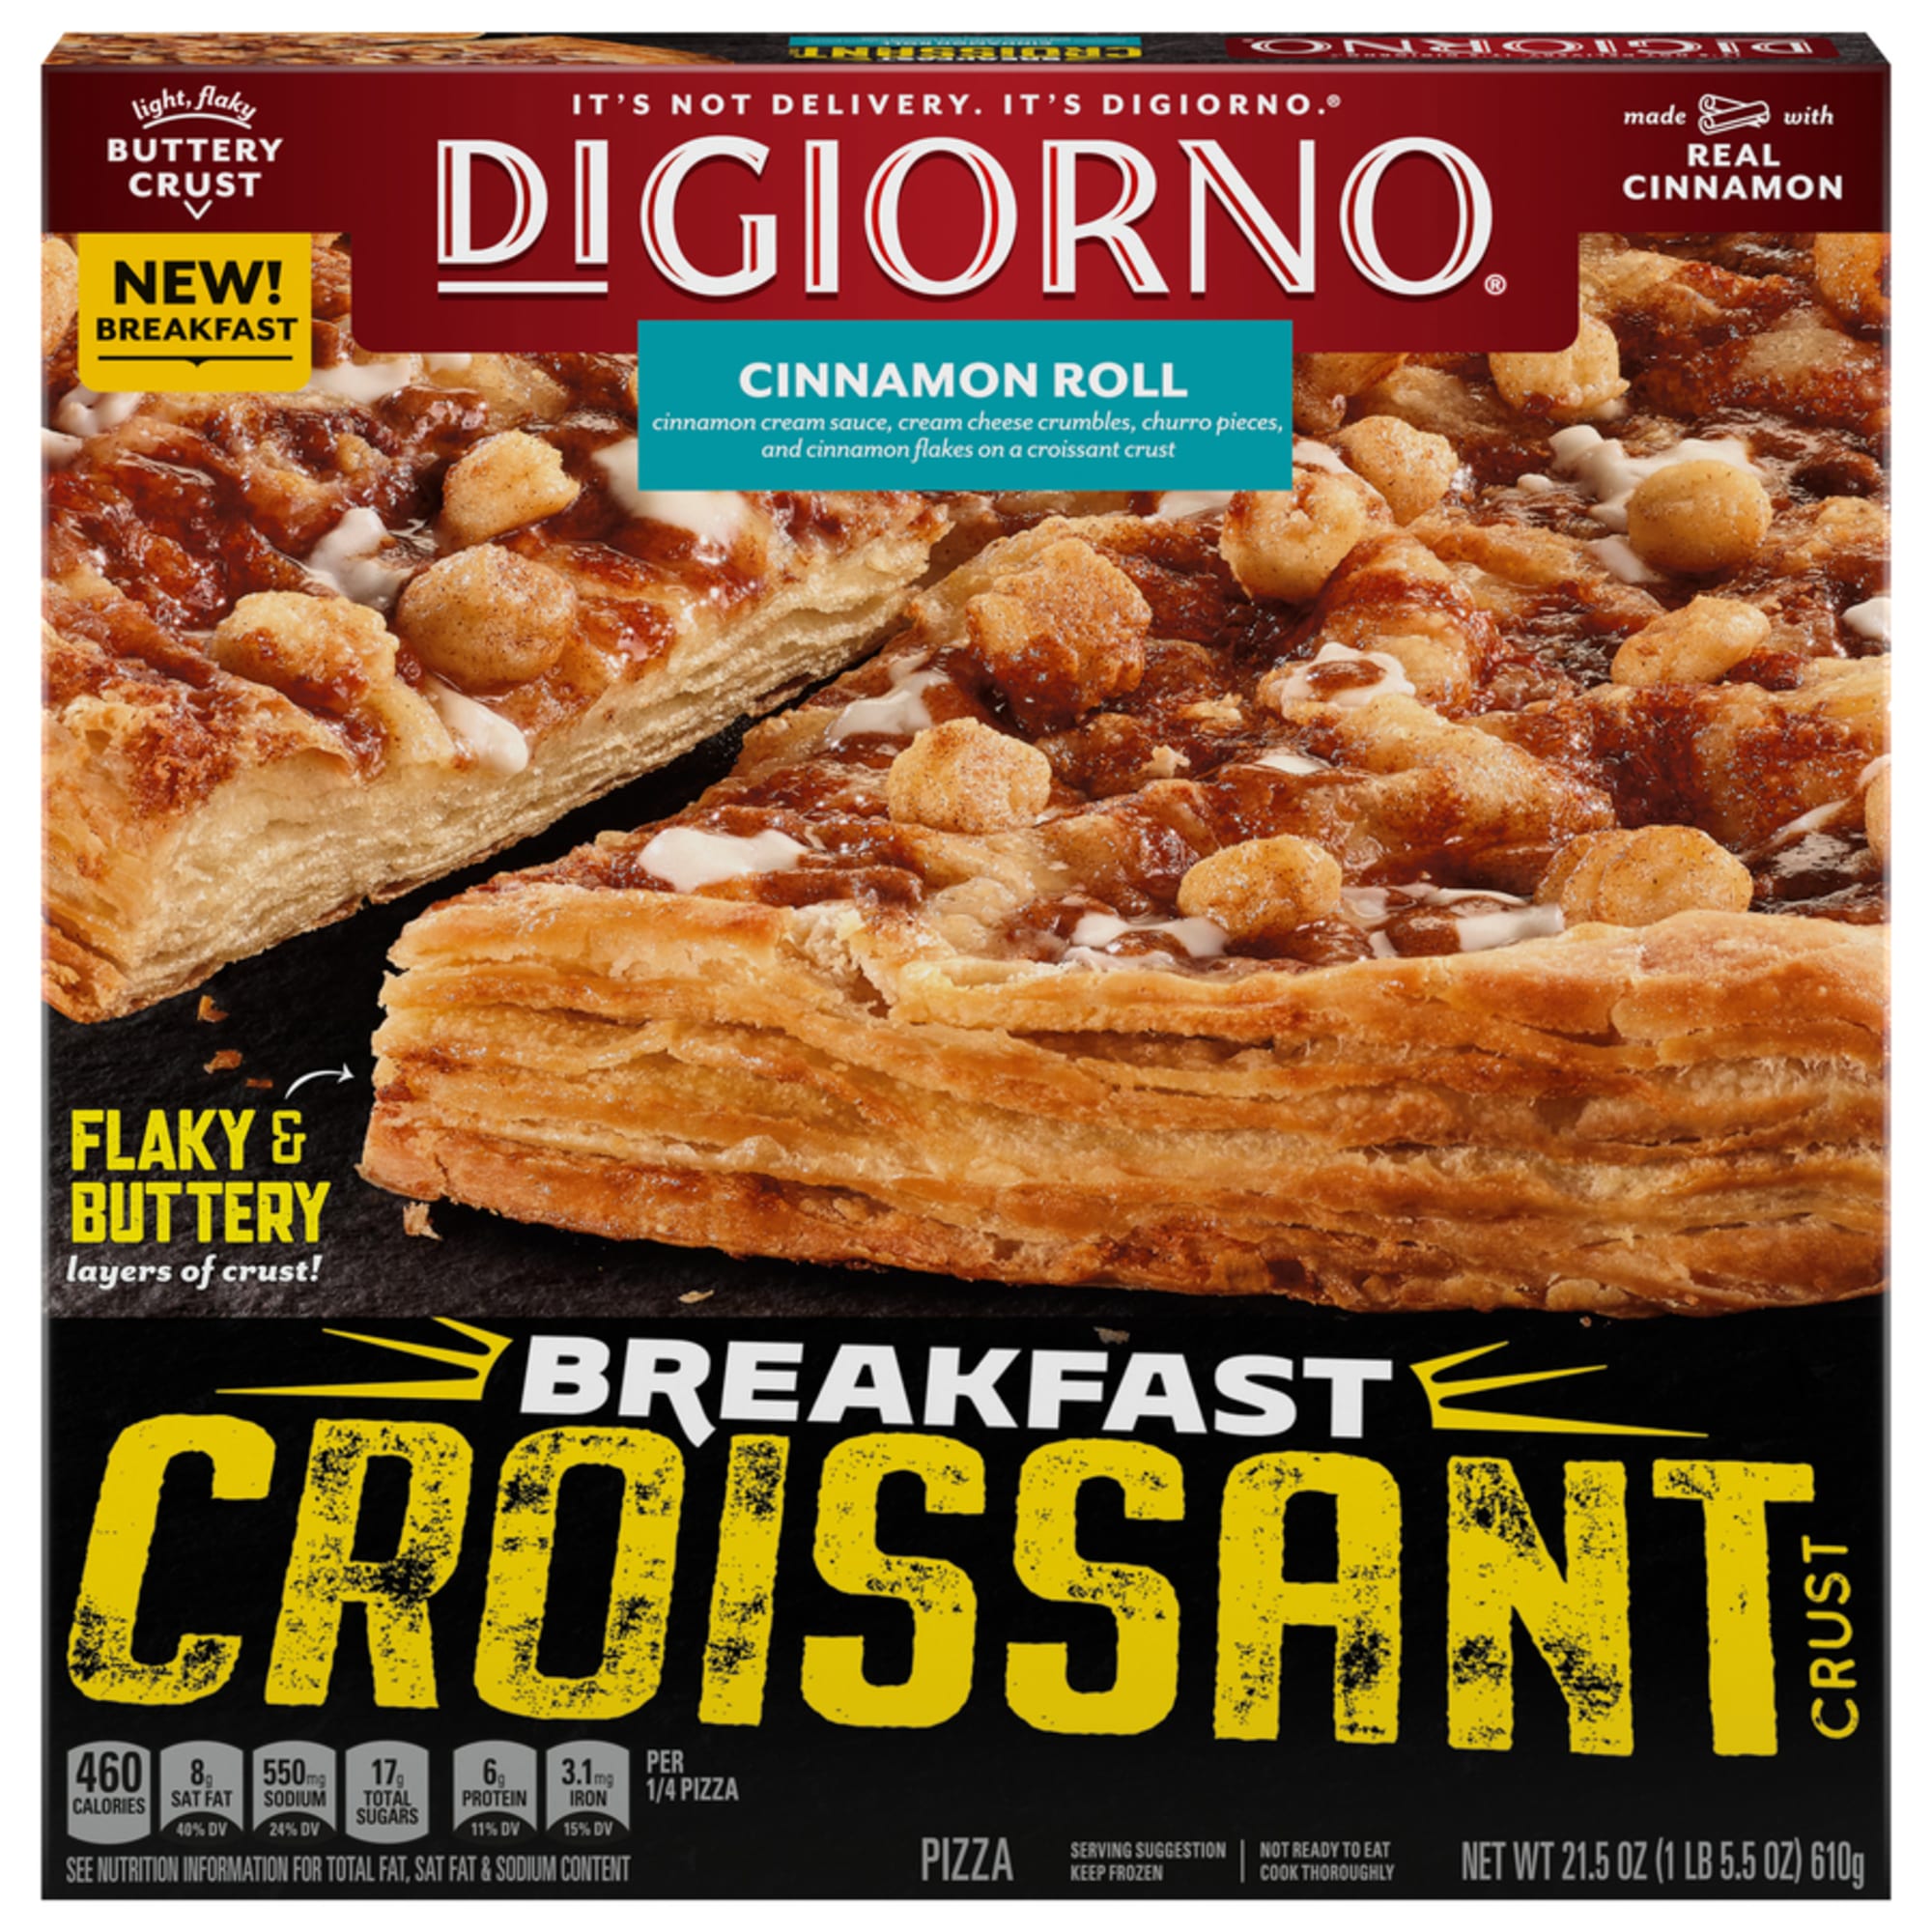 DiGiorno introduces a bunch of new pizza flavors